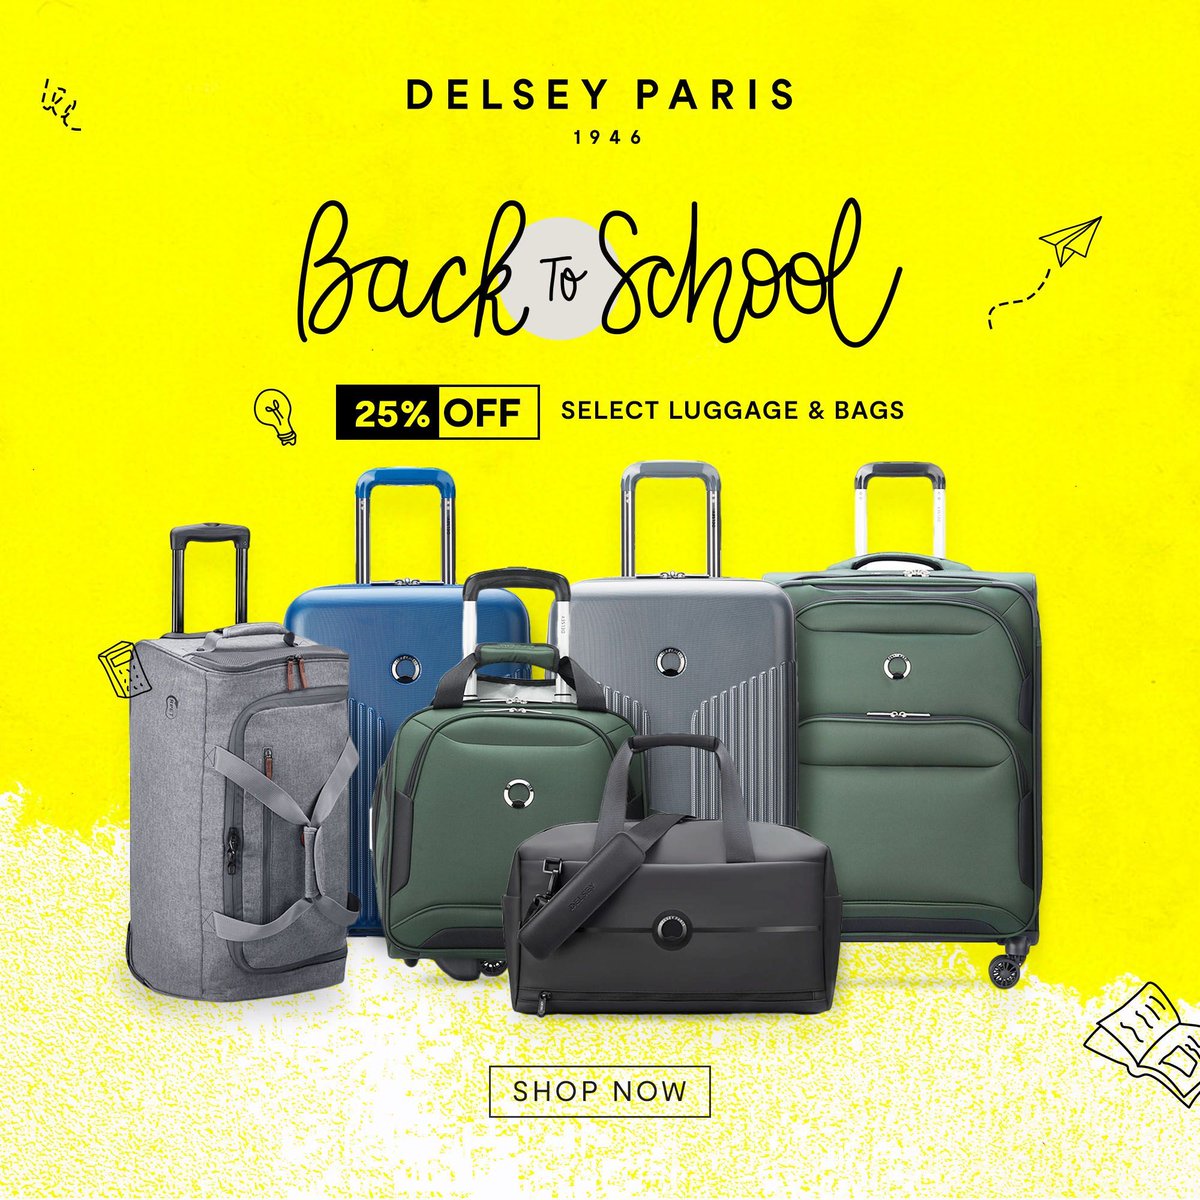 Catchy Social media graphic concepts for Delsey Paris’ Back to School Offer. At Nulife our designs are visually engaging and crafted to compel the desired call to action.

Contact us today for custom graphics for your digital needs

#graphicdesign #socialmediabanners #nulife